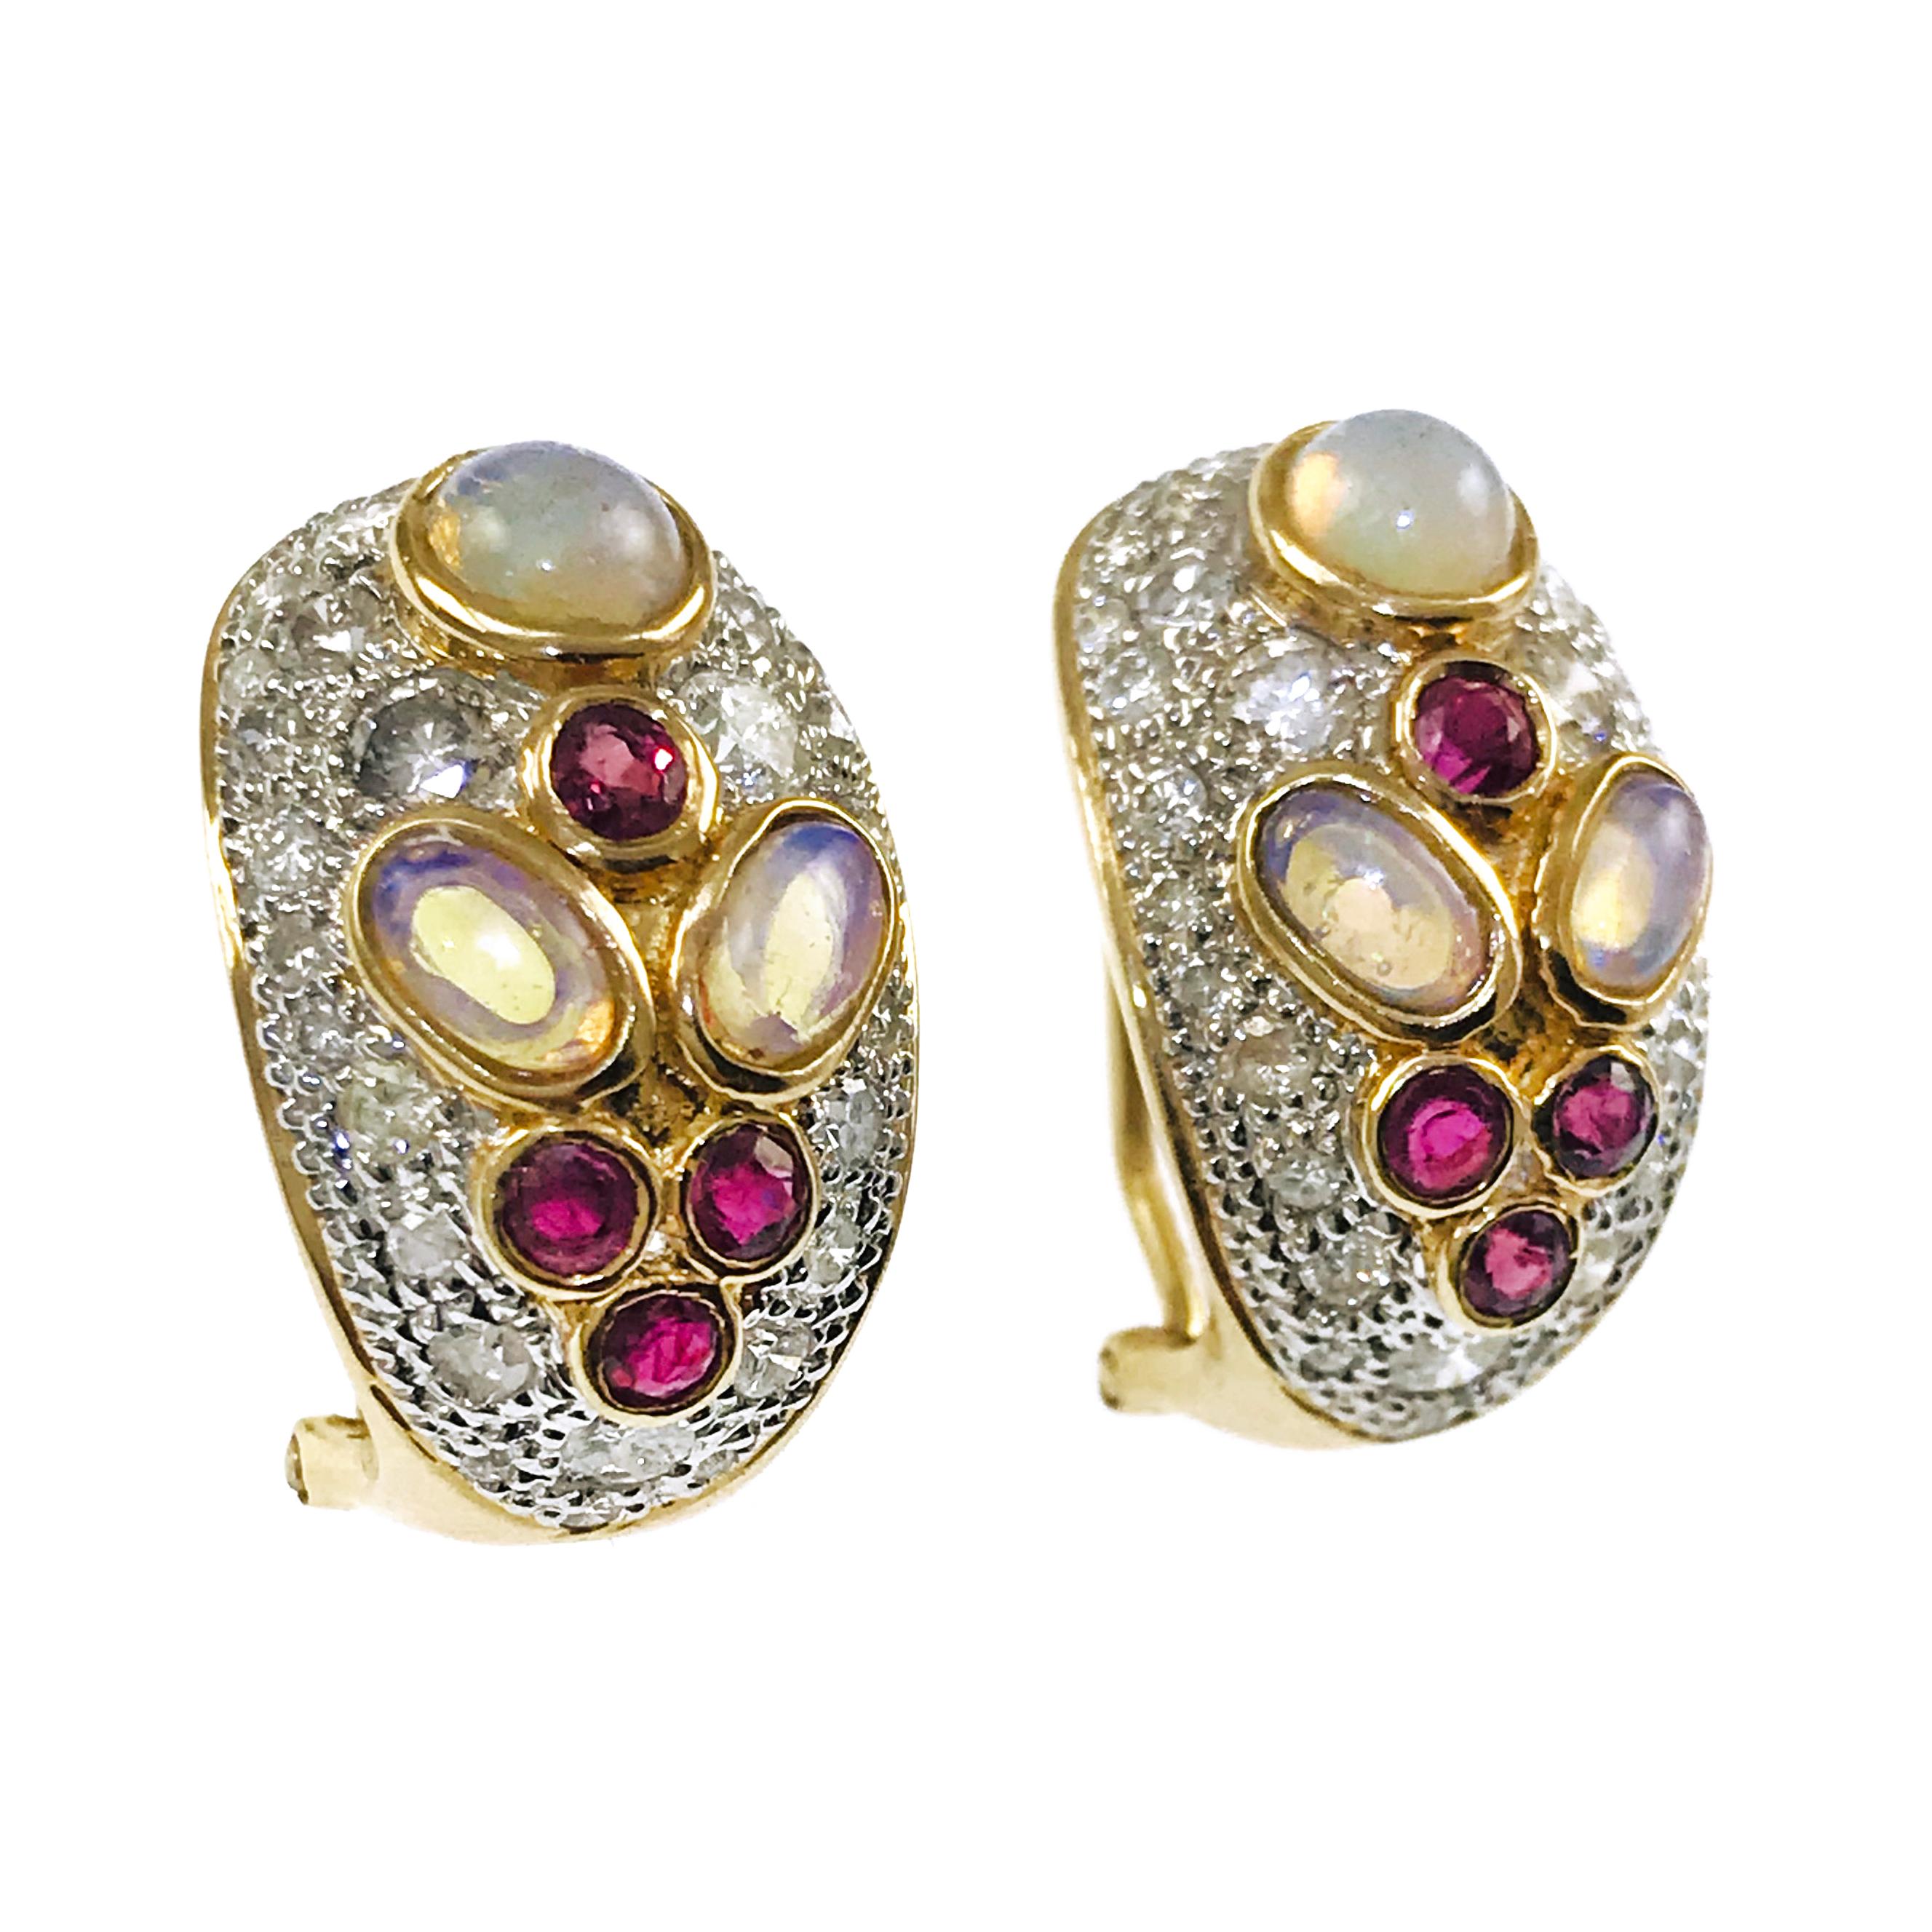 14 Karat Two-Tone White and Yellow Gold Opal Ruby Diamond Clip-On Earrings. Three bezel-set Opals, one round, two oval, four round bezel-set Ruby's set in yellow gold and 60 pavé-set diamonds on each earring set in white gold. The round Opal